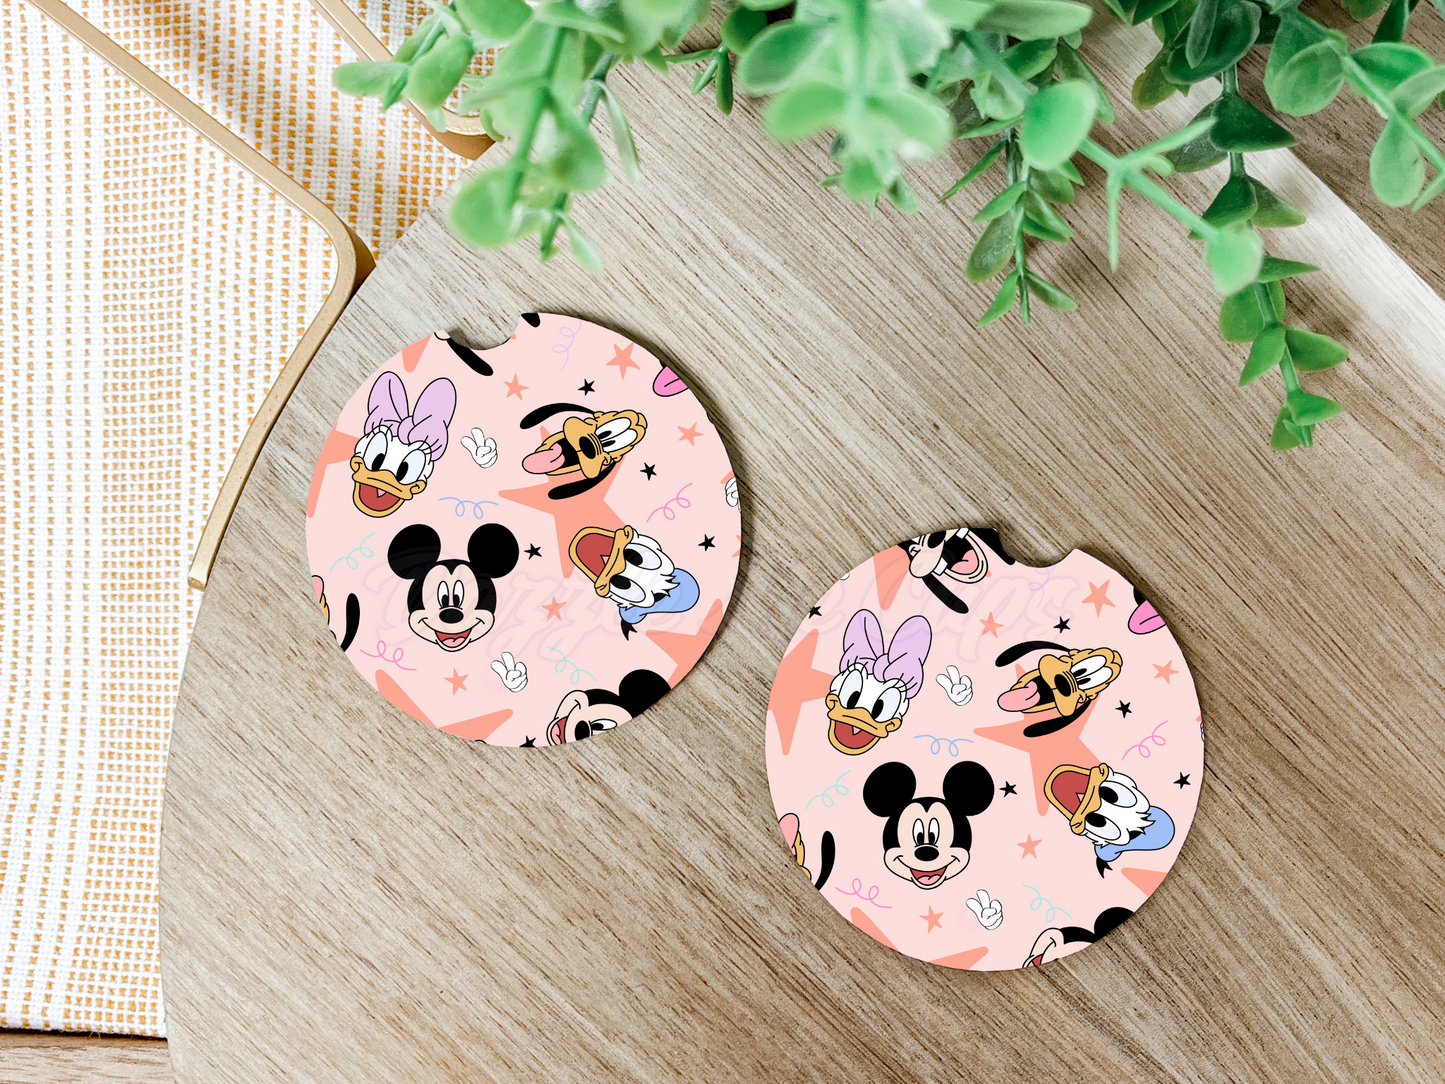 Mickey and Friends Car Coaster-Set of 2